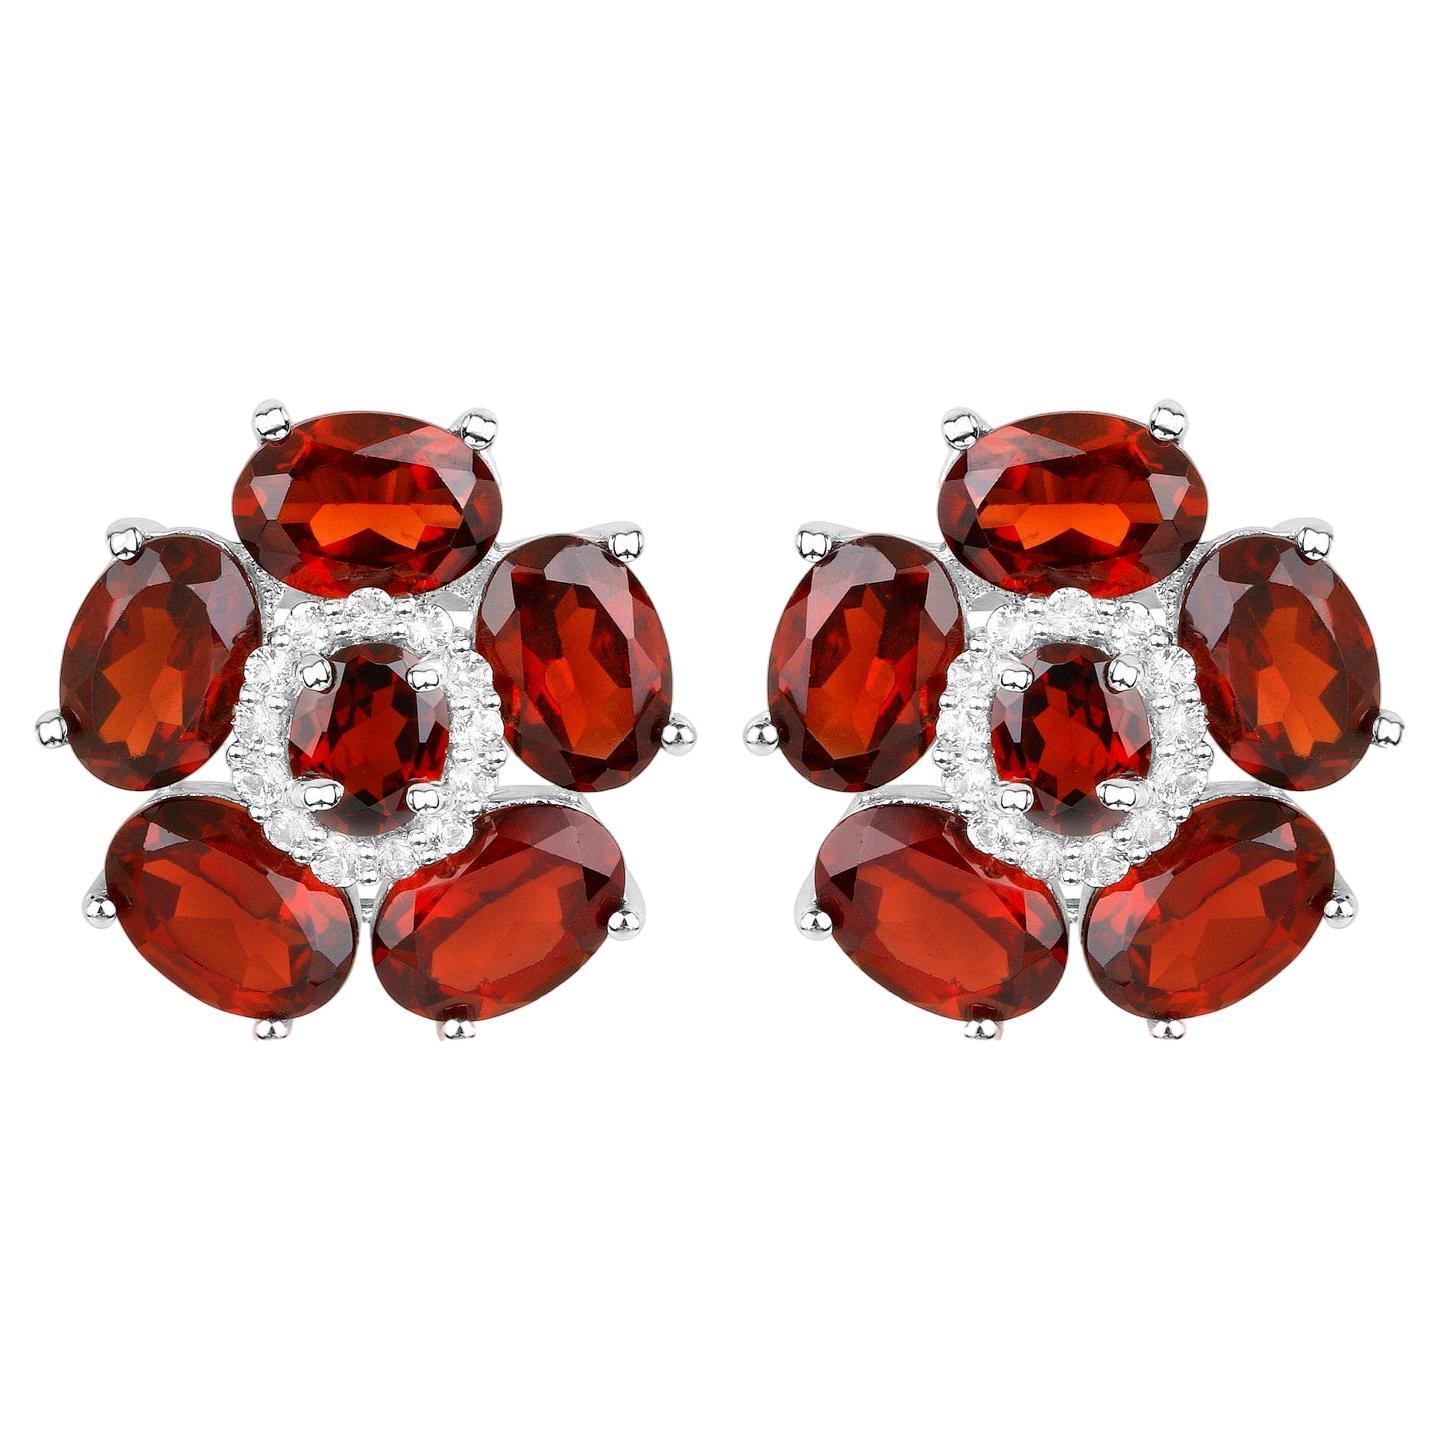 Natural Garnet and White Topaz Floral Earrings 9.6 Carats Total